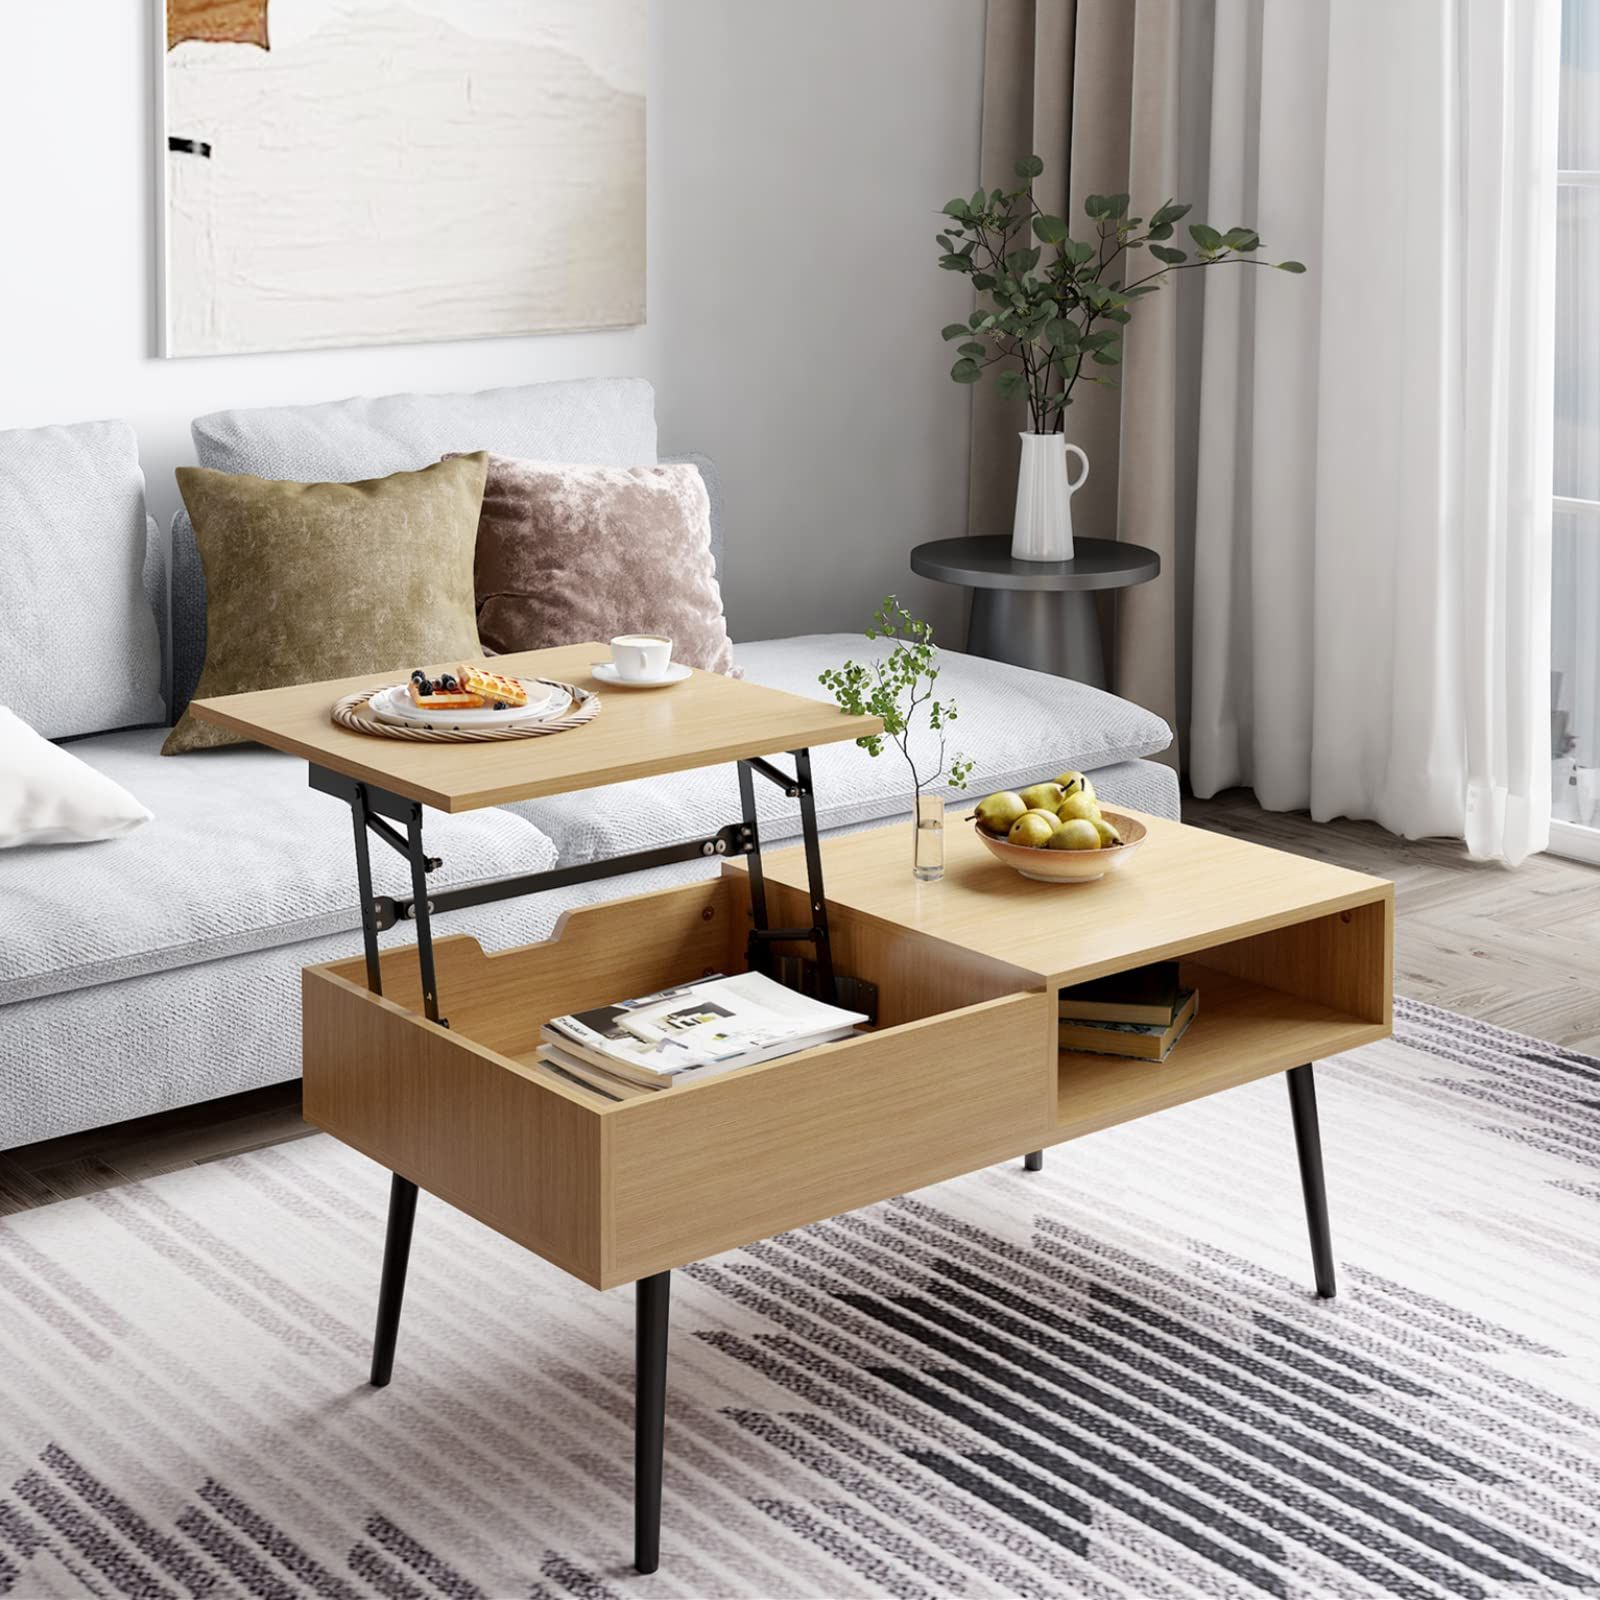 Most Recent Modern Wooden Lift Top Tables Pertaining To Amazon: Coffee Table Living Room Tables – Lift Top Coffee Table With  Storage 39", Modern Adjustable Wood Rising Center Table With Hidden  Compartment (wood) : Home & Kitchen (View 2 of 10)